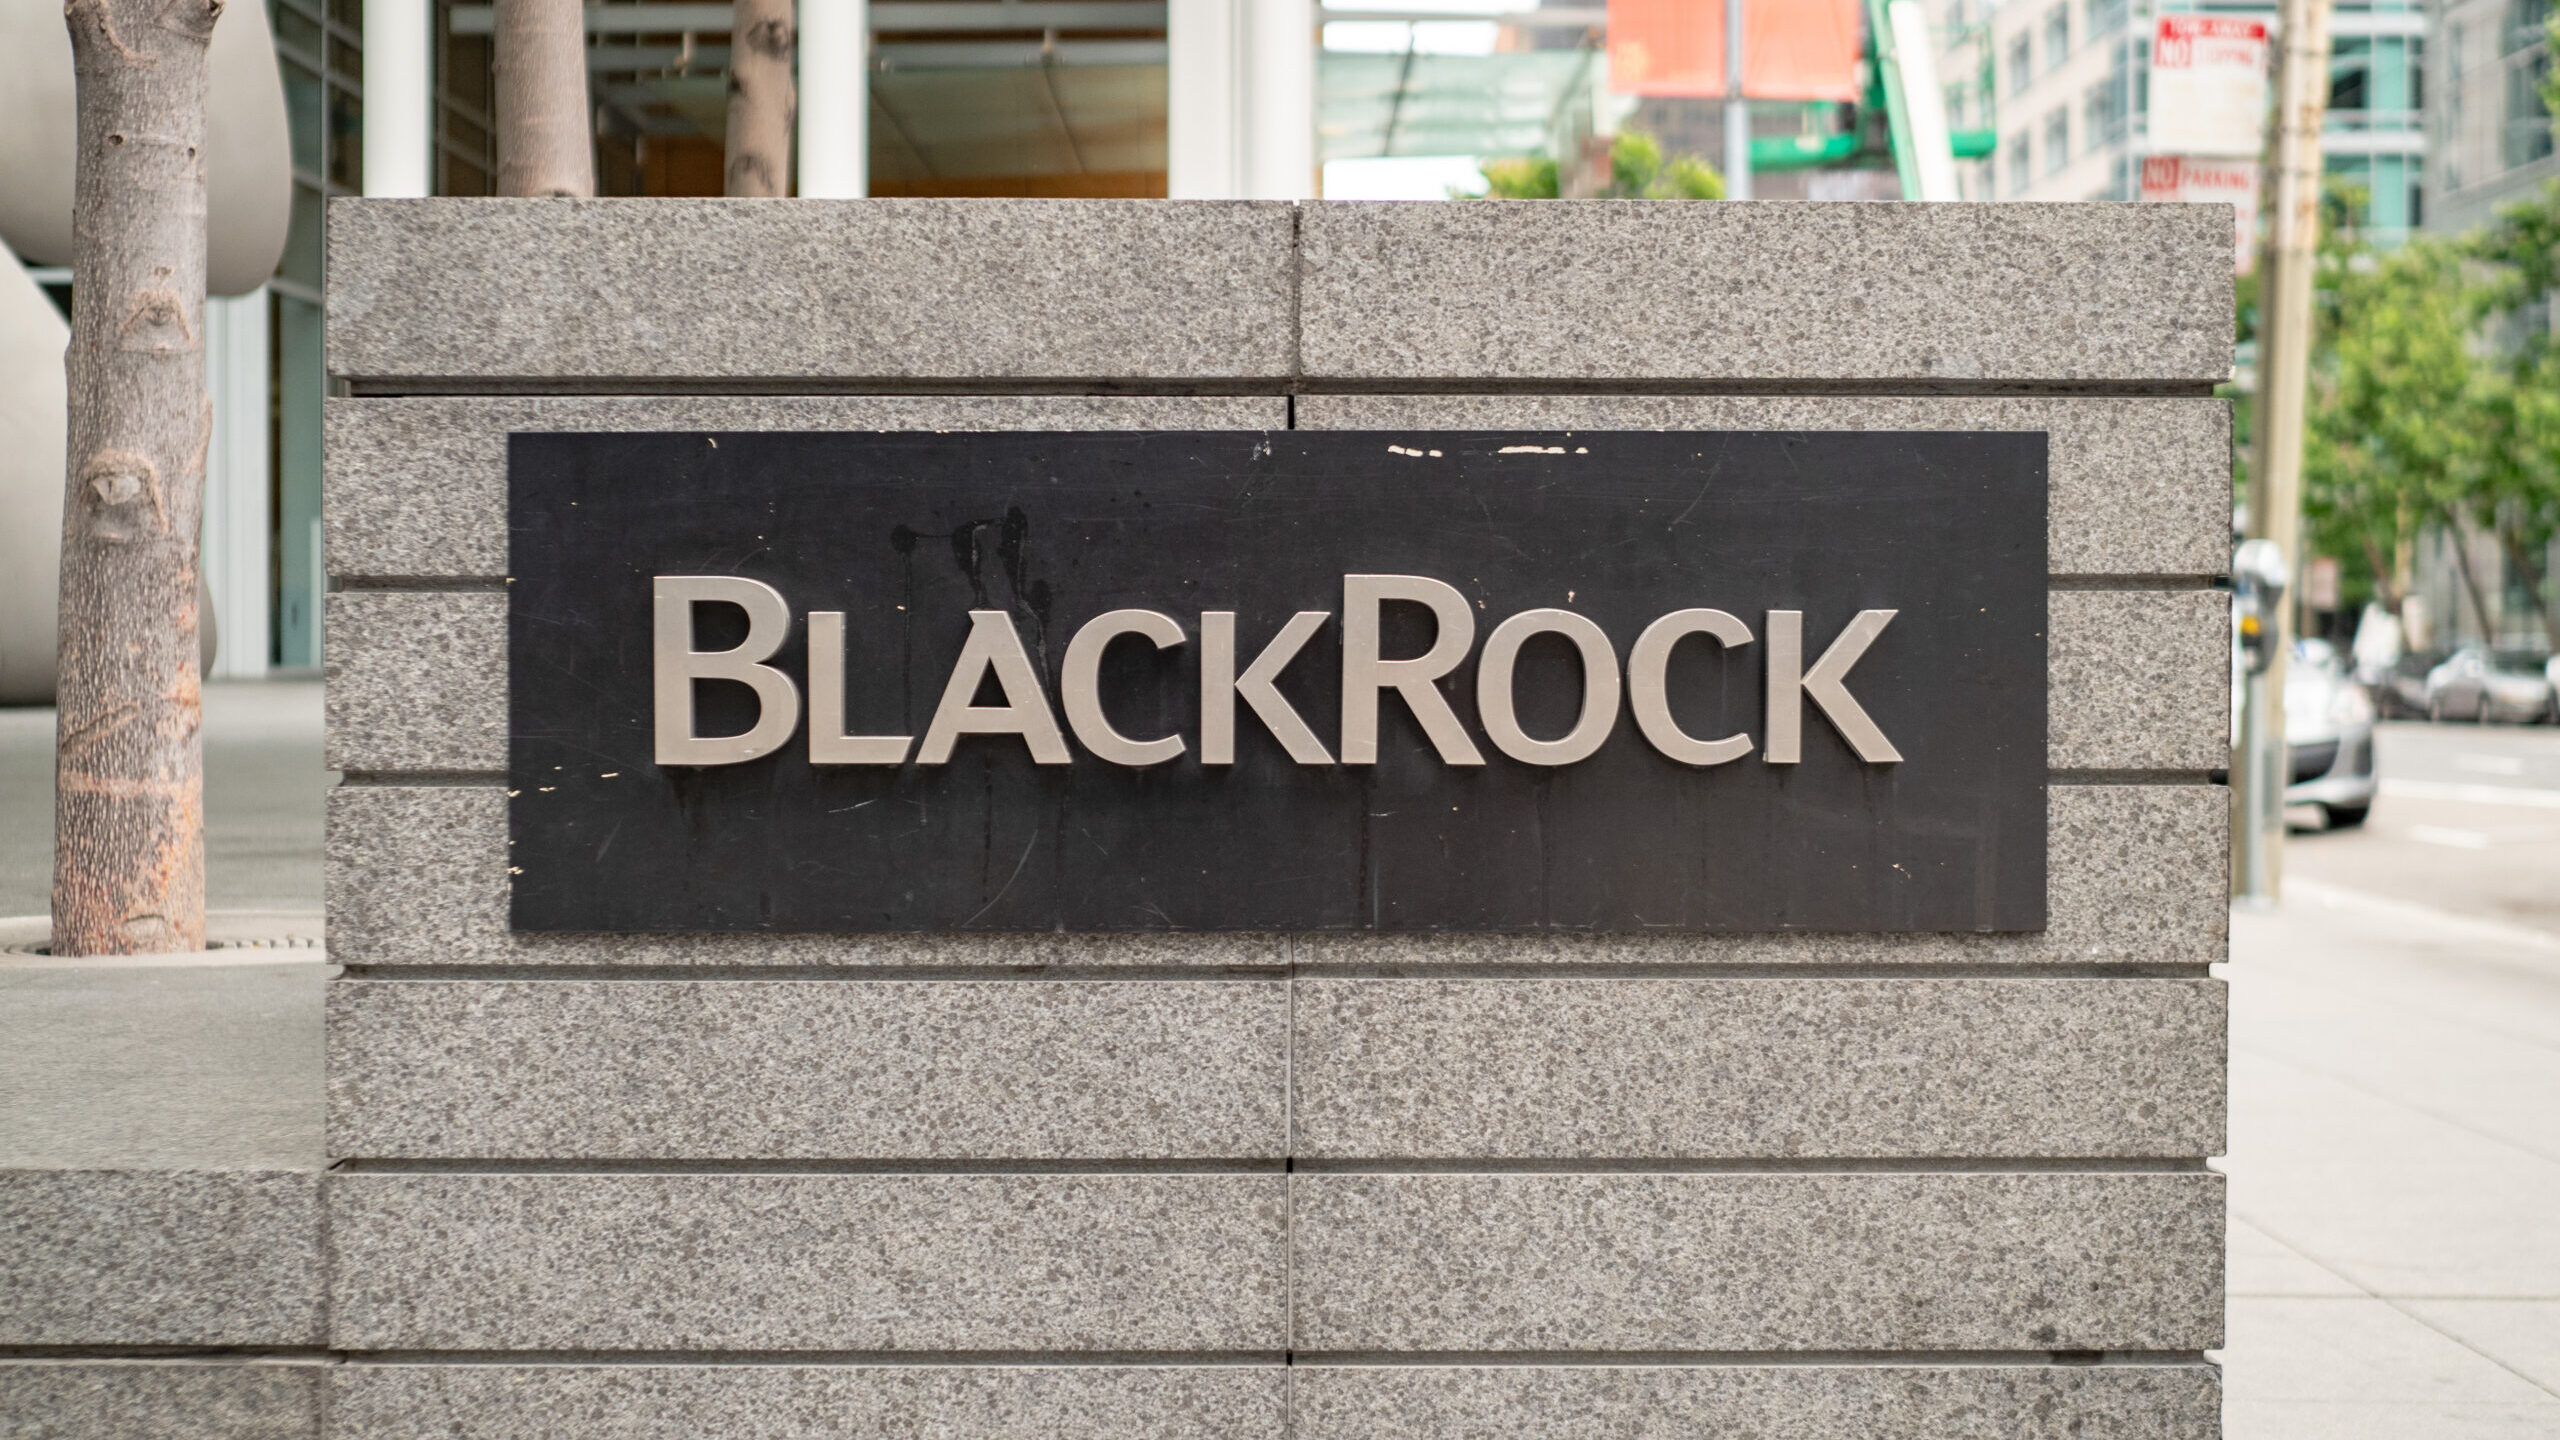 Meta confirms NFT rollout across 100 countries | BlackRock enables crypto access through Coinbase integration | Robinhood cutting about 23% of jobs